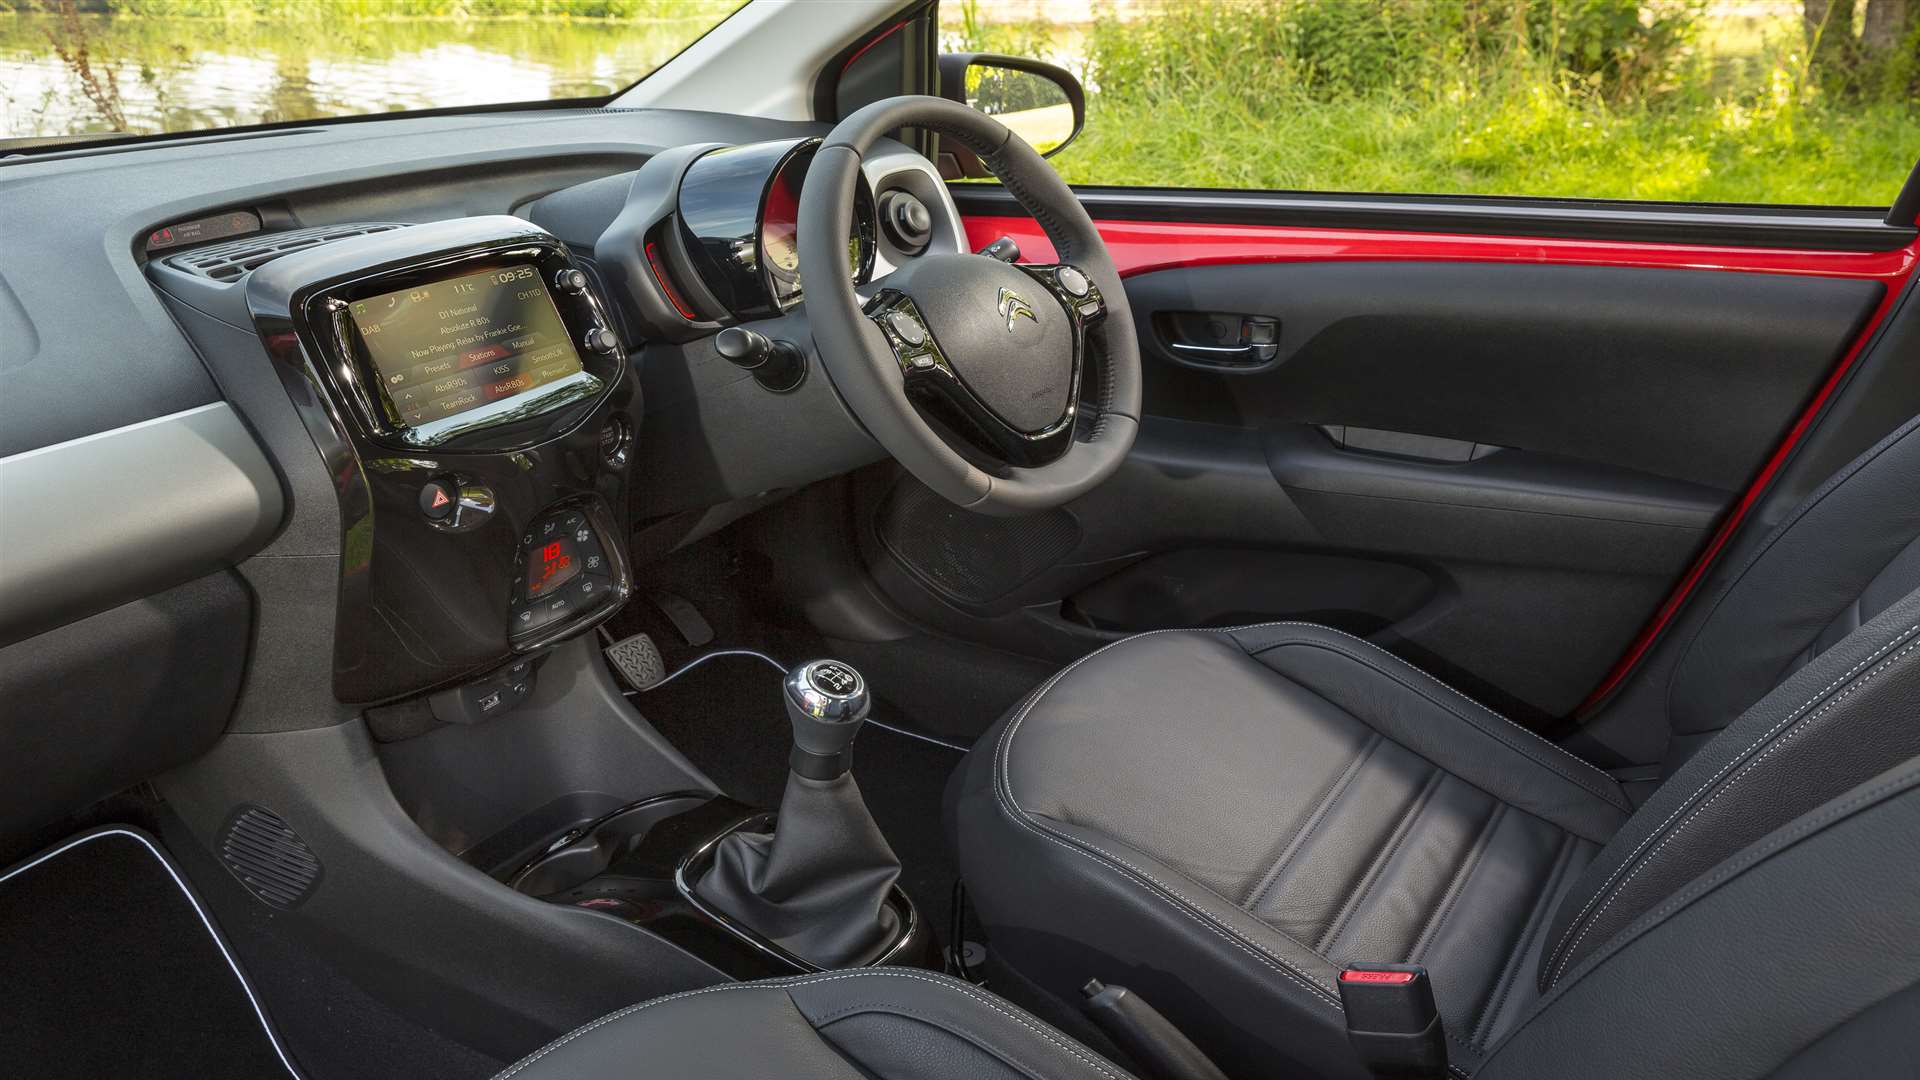 The high gloss interior with leather steering wheel and chrome gear lever add some style to the C1